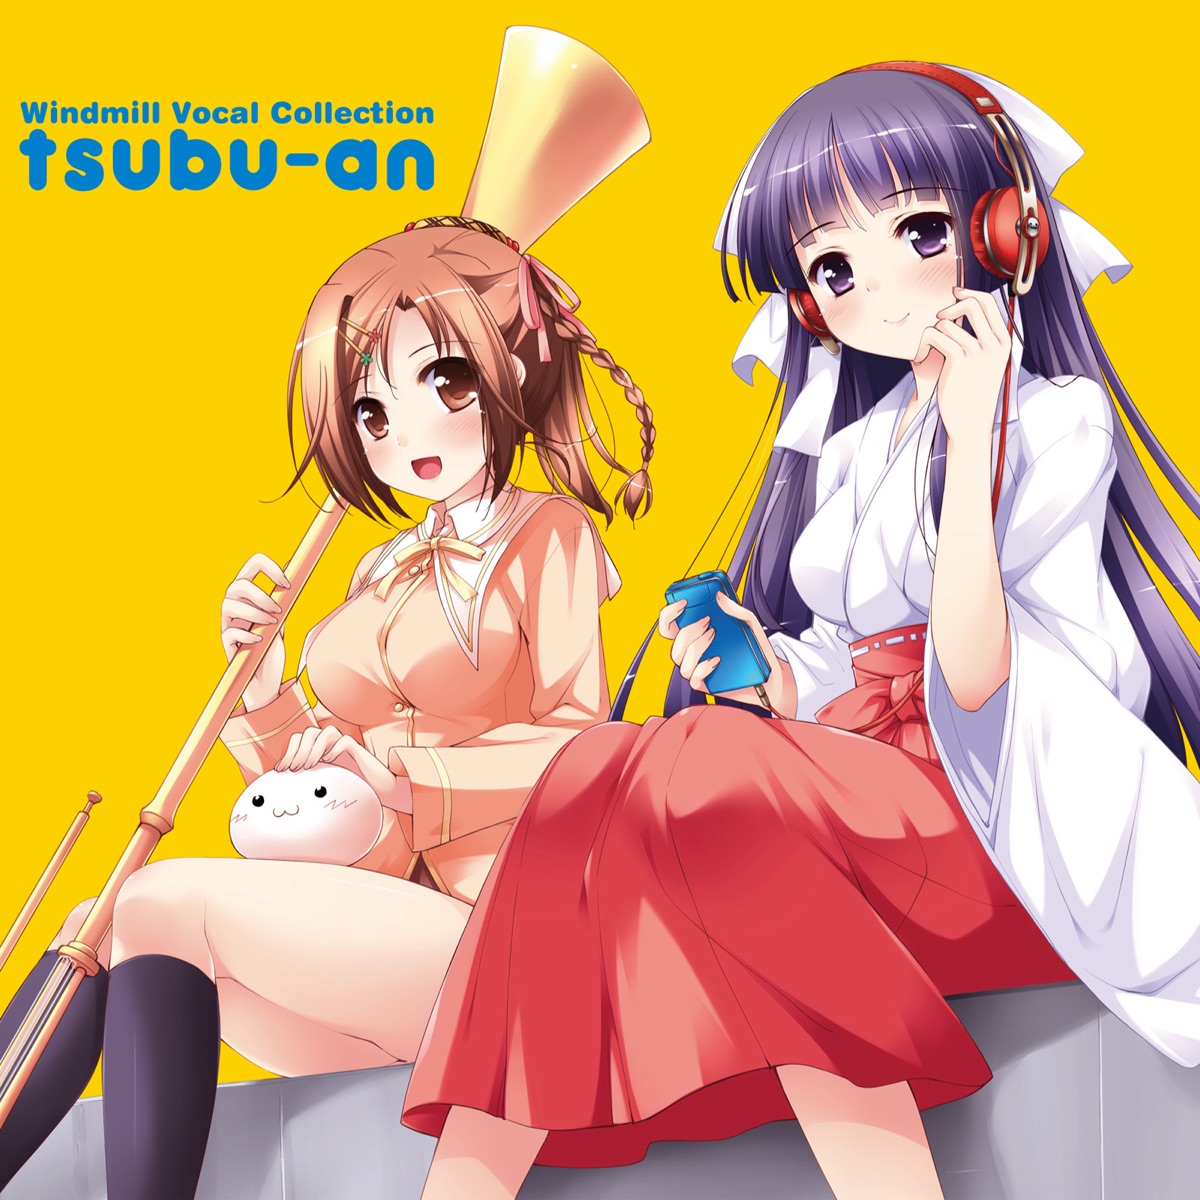 Windmill Vocal Collection tsubu-an - Various Artistsのアルバム - Apple Music